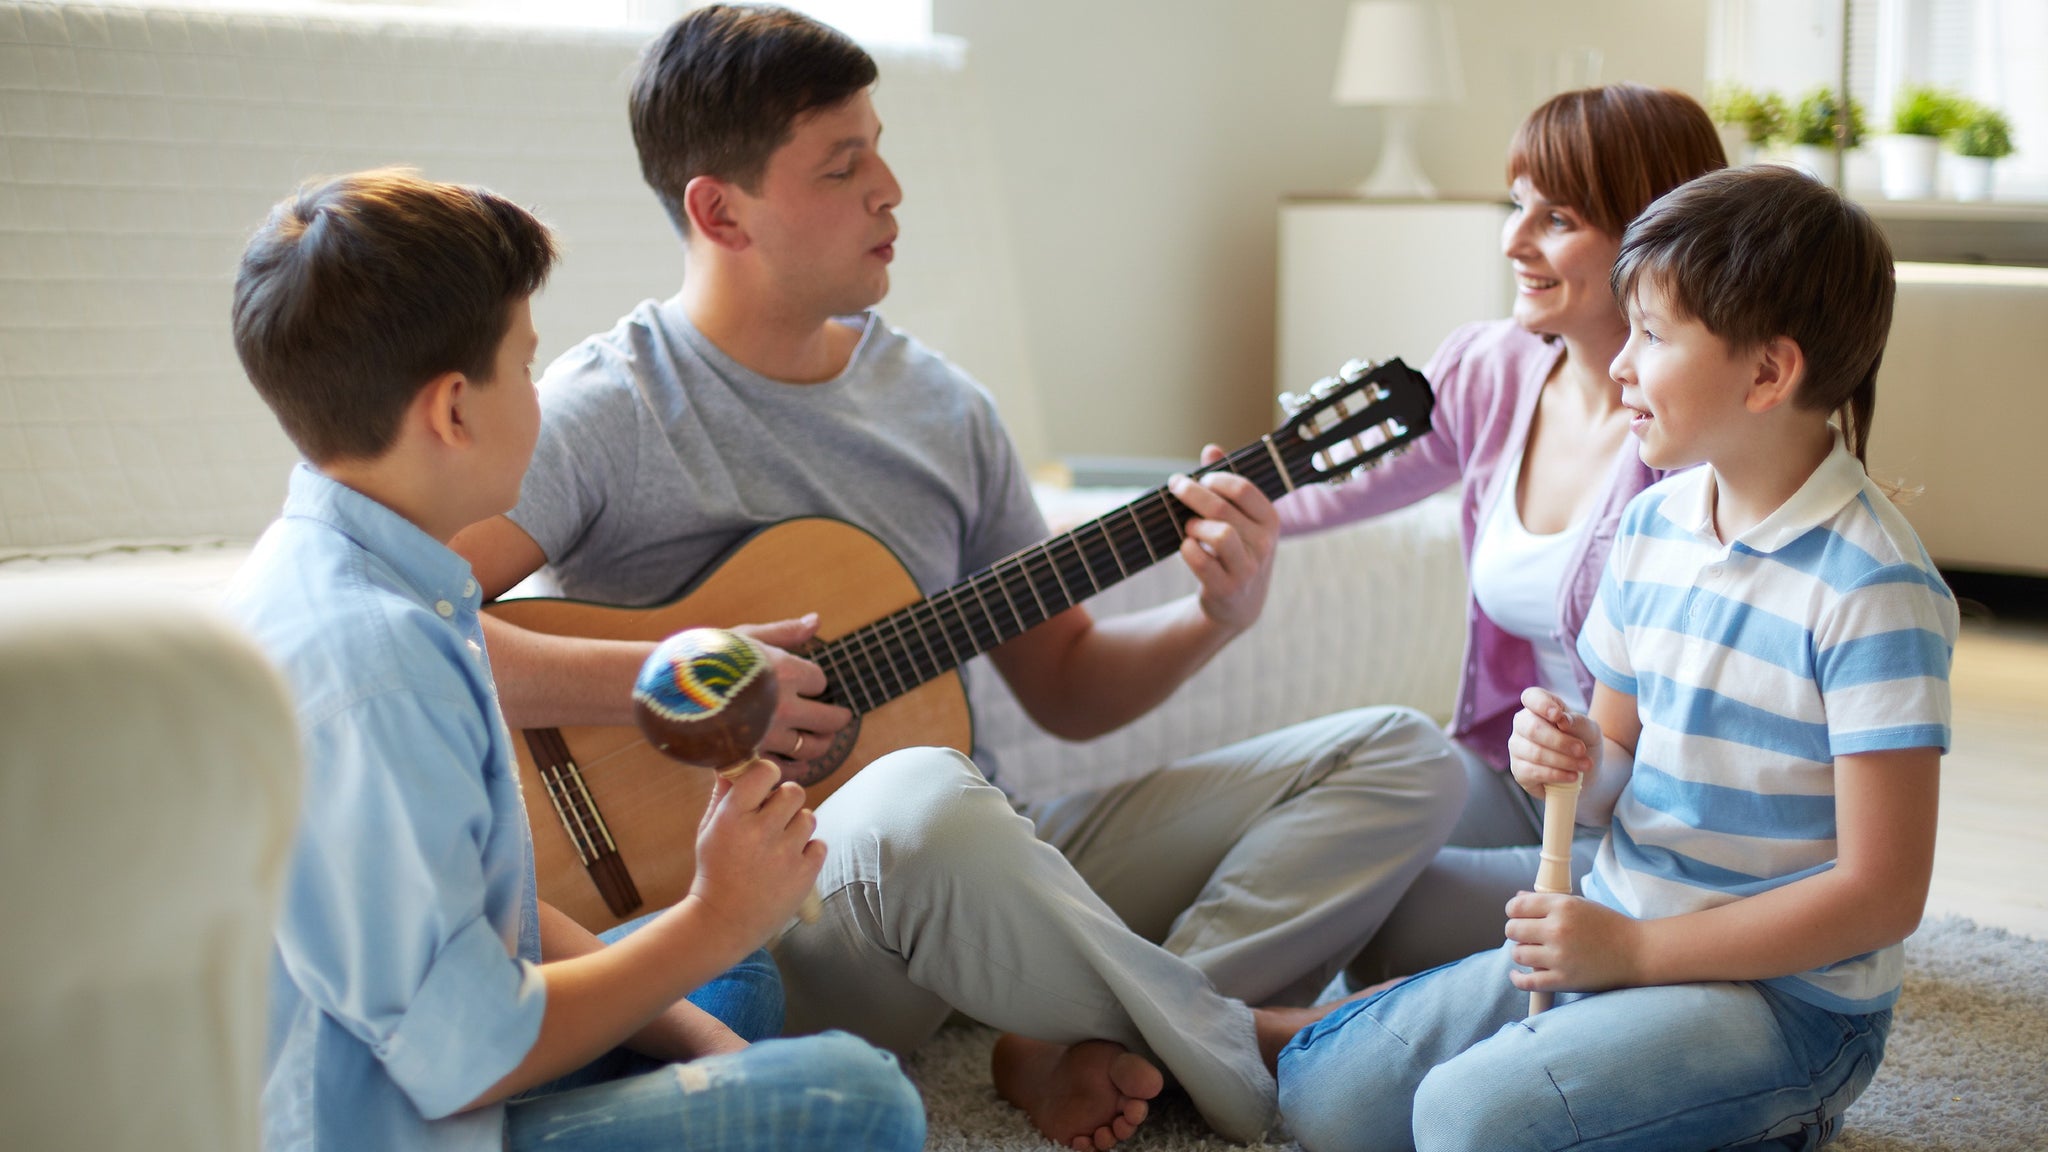 Family Activities for Kids Who Love Music